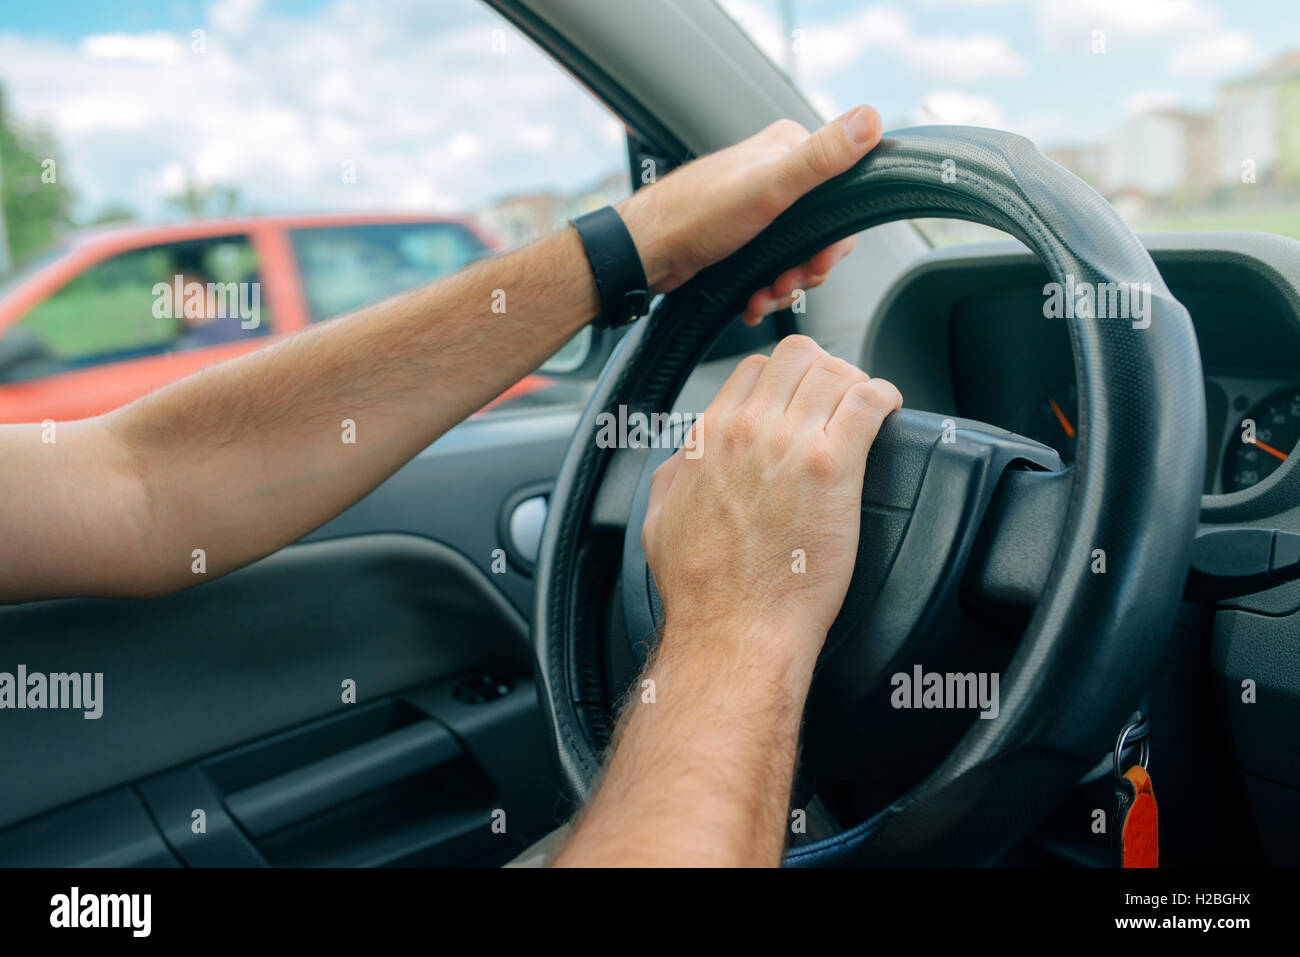 Nervous male driver pushing car horn in traffic rush hour, close up with selective focus on hand on the steering wheel Stock Photo